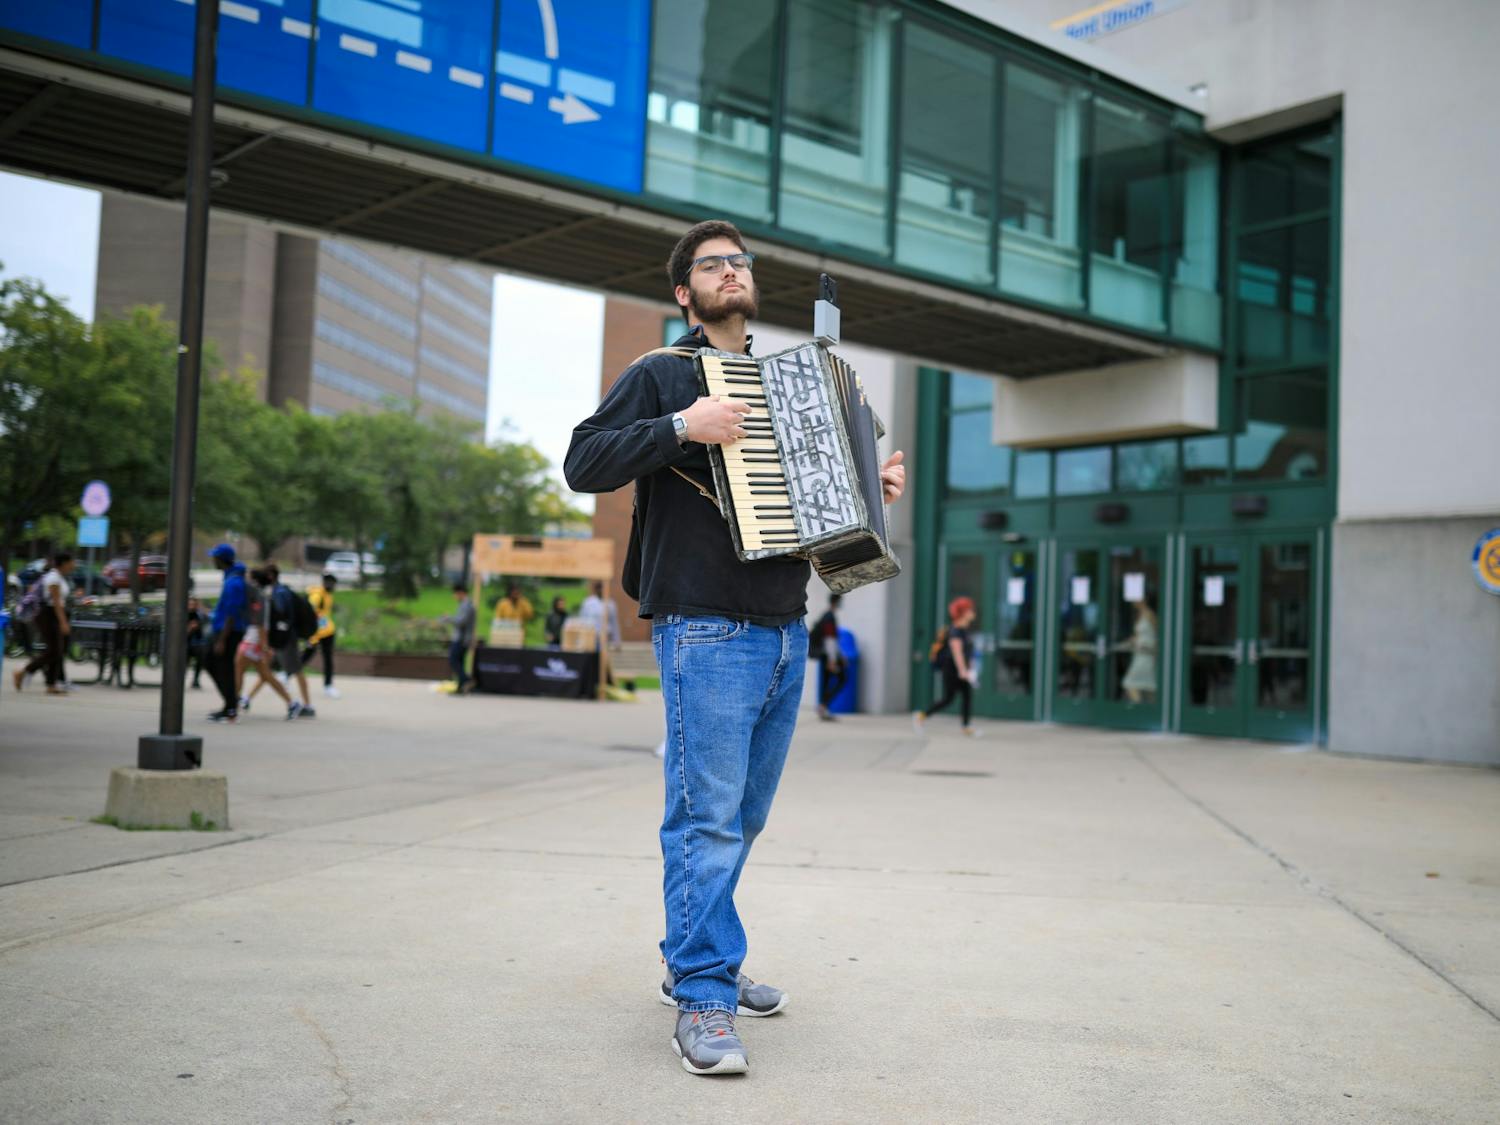 “Accordion guy” plays outside the Student Union.&nbsp;